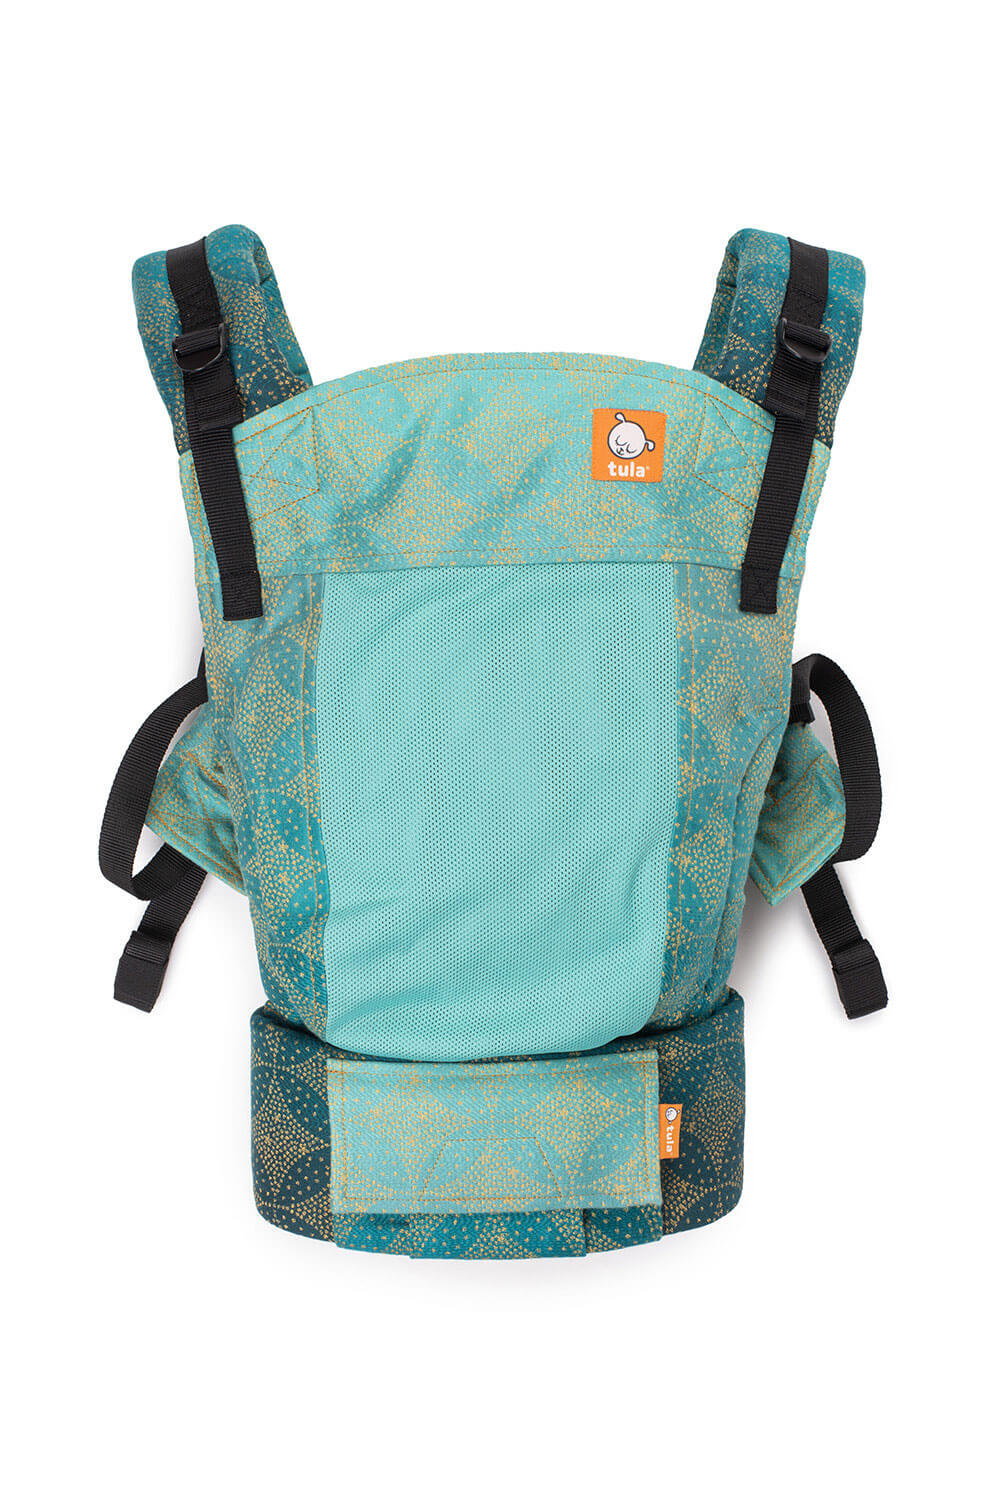 Coast Starry Night Gold Dust - Signature Woven Free-to-Grow Baby Carrier